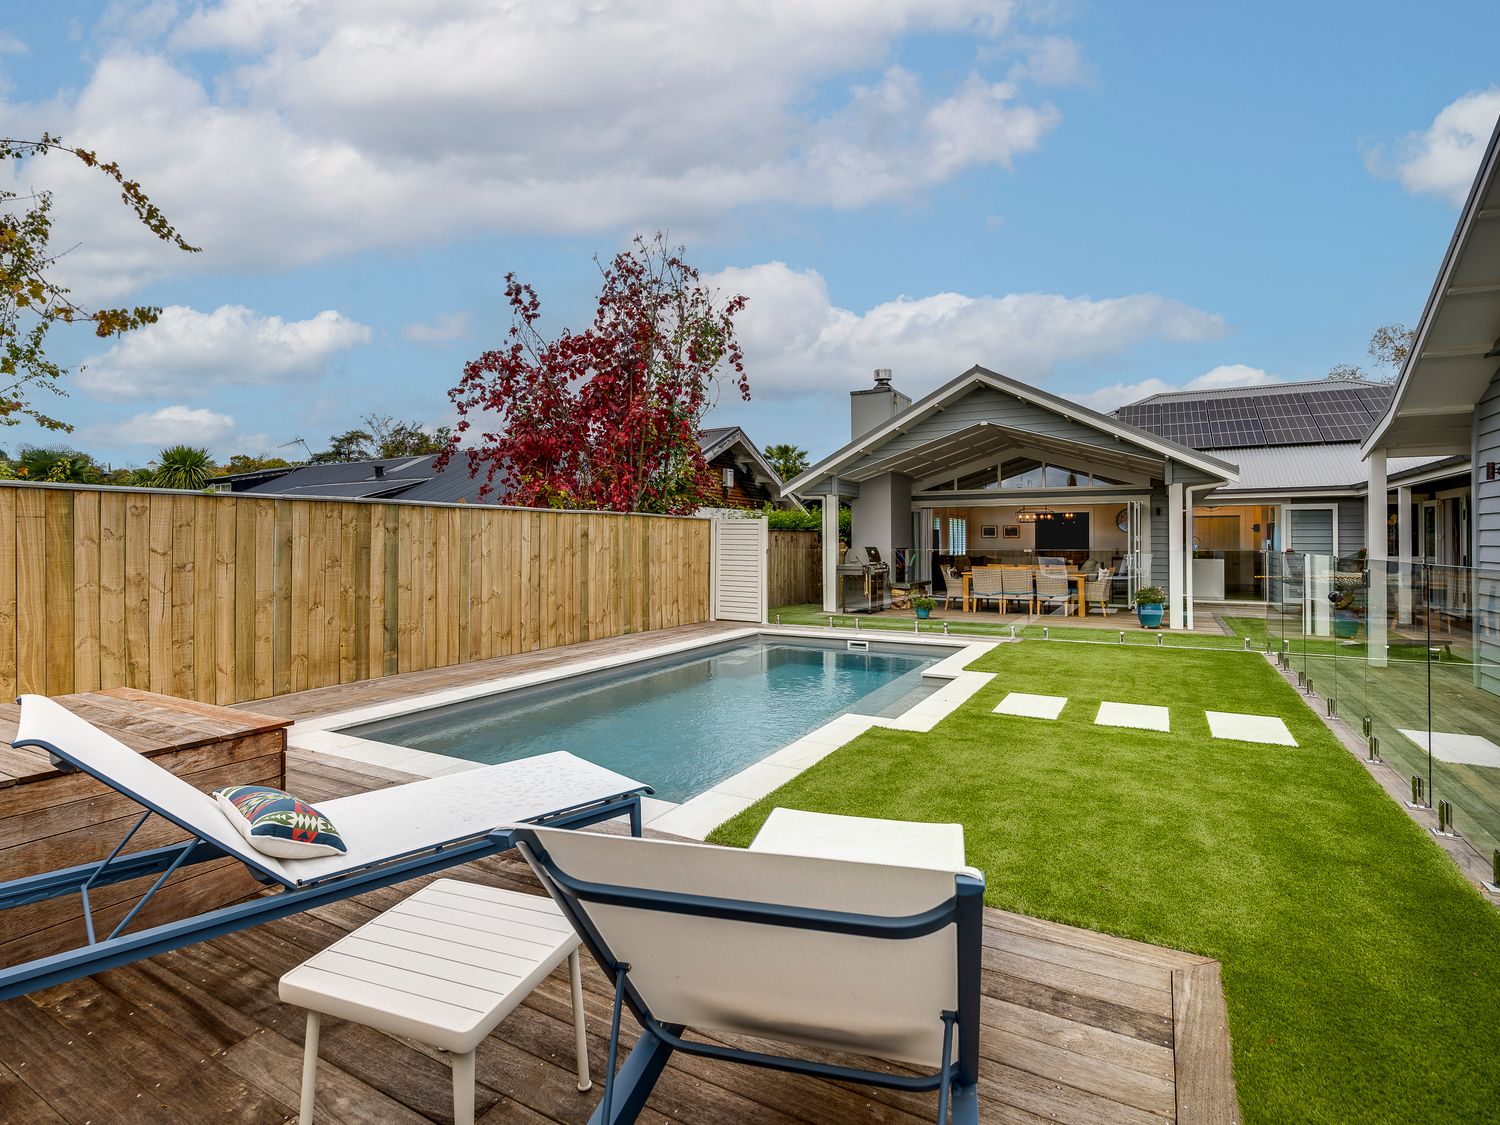 Modern Deluxe - Havelock North Holiday Home -  - 1157138 - photo 1